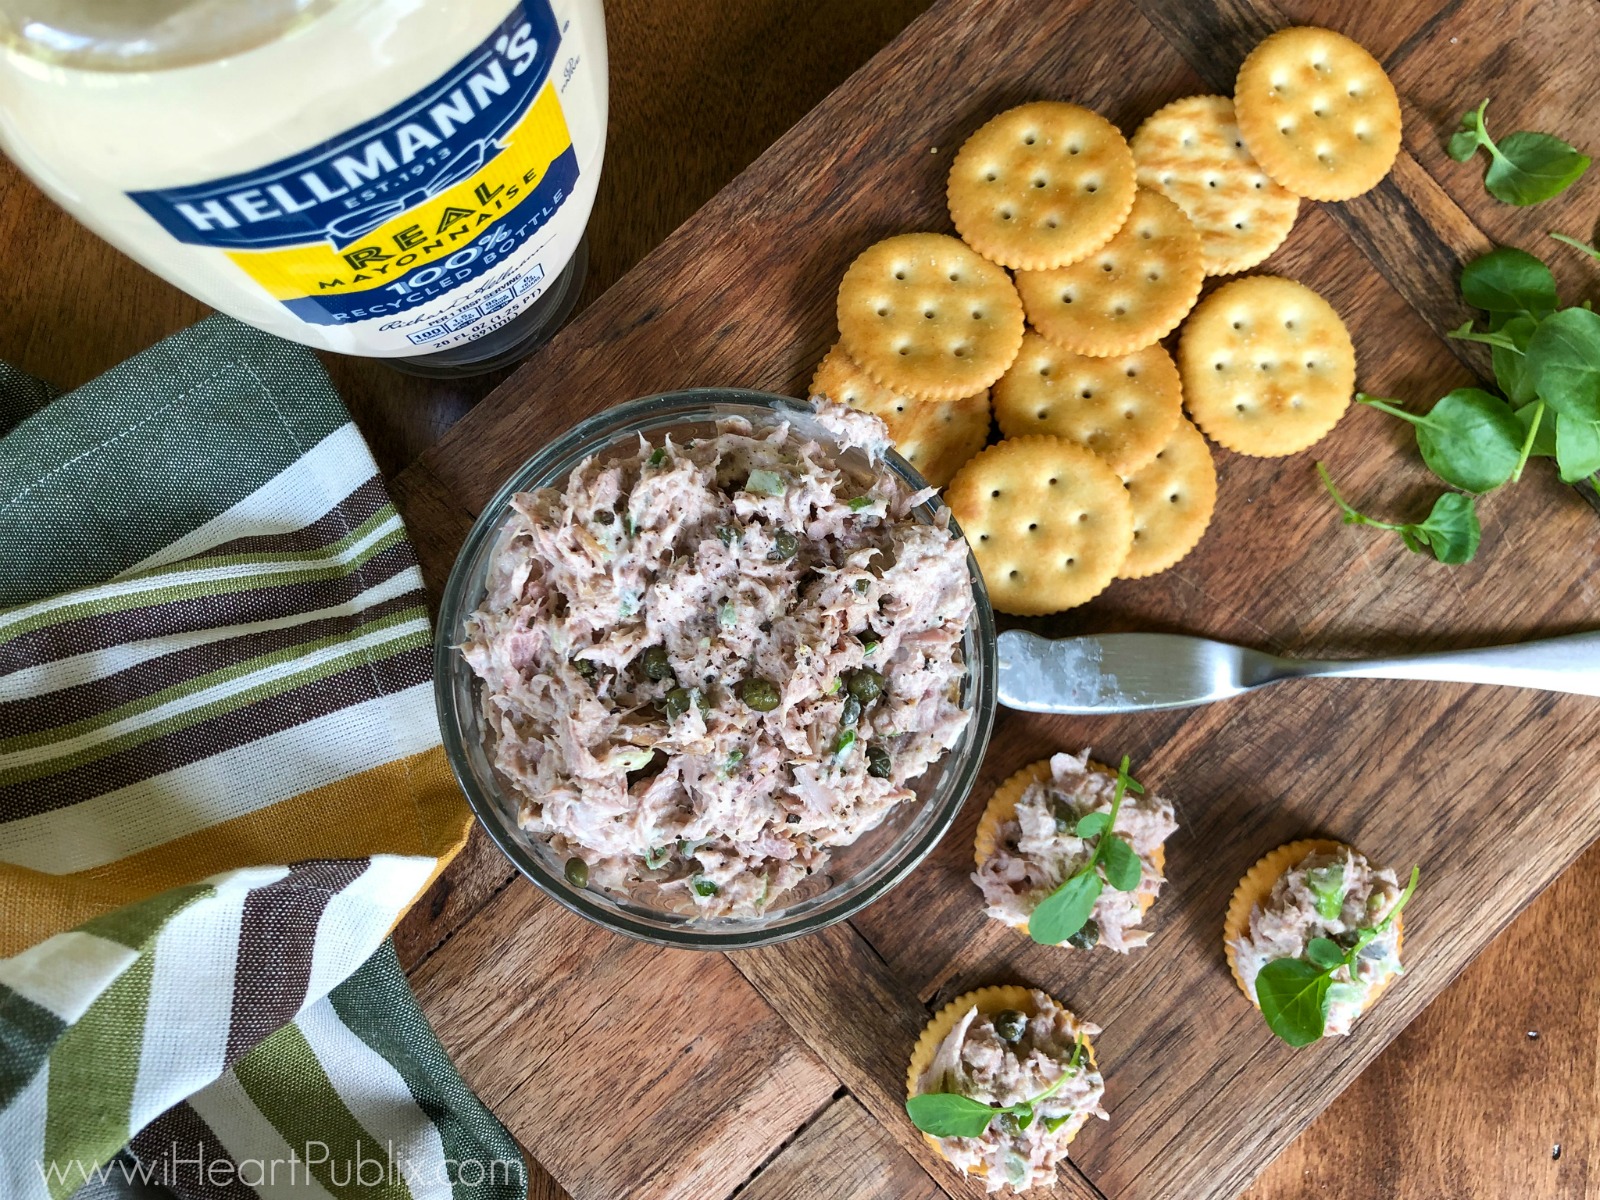 Still Time To Get Big Savings On Hellmann’s Mayonnaise At Publix